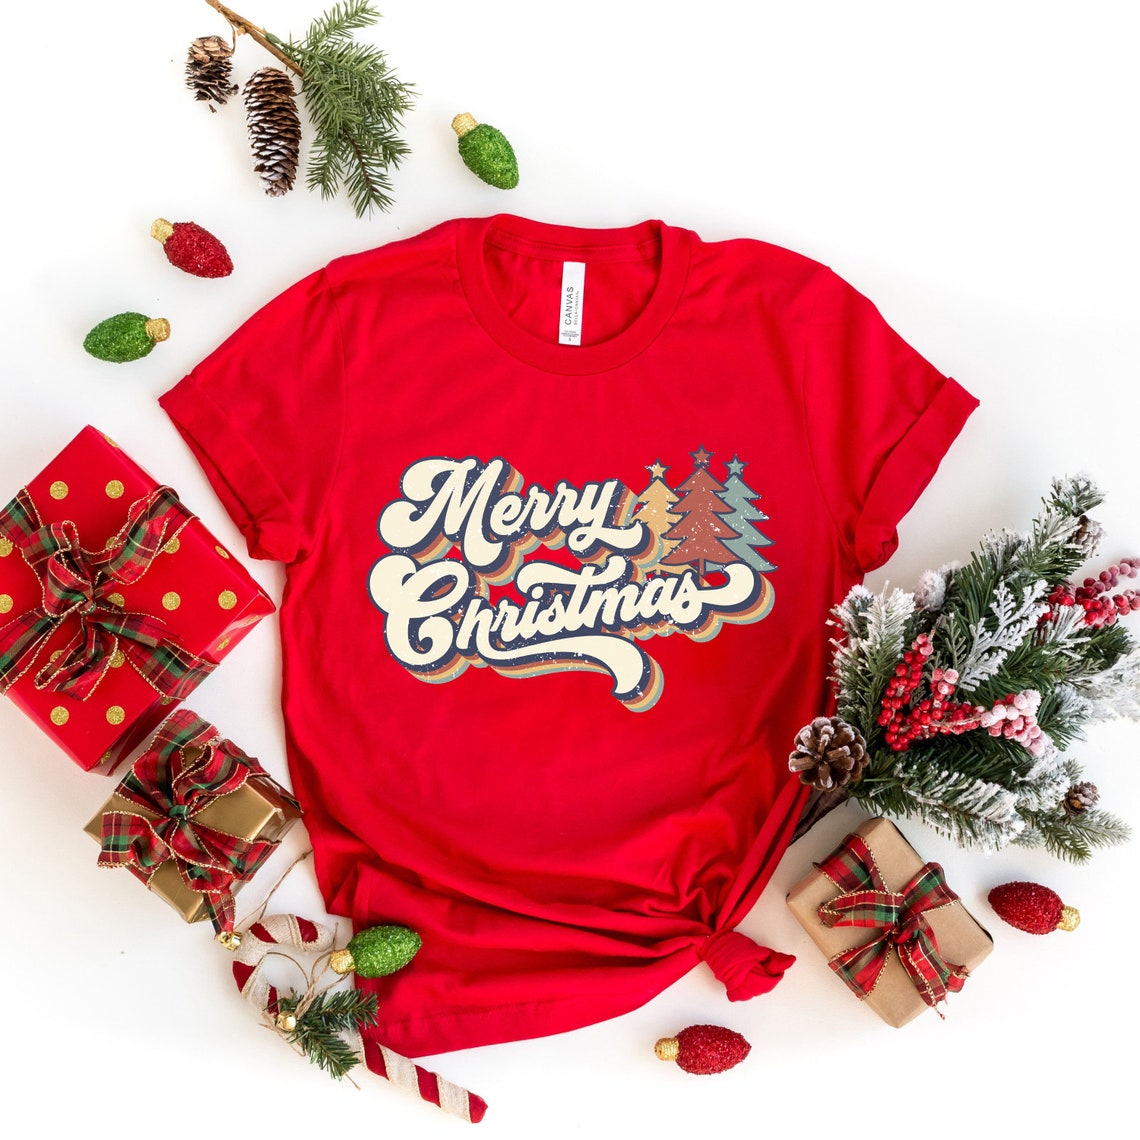 70s Style Merry Christmas Text Shirt